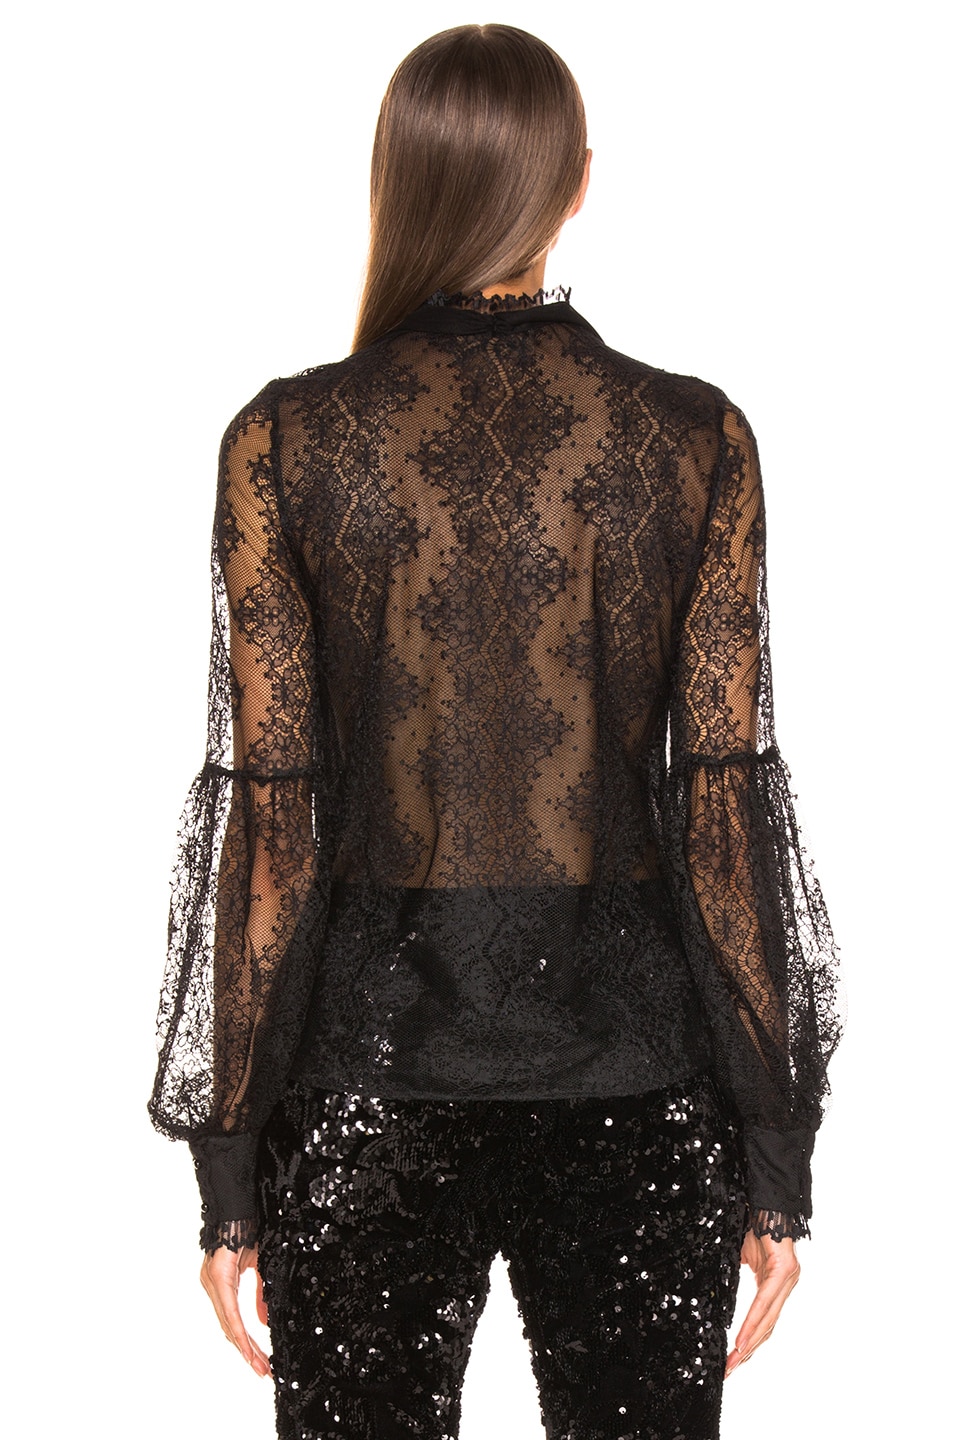 Alexis Charis Top in Black Lace | FWRD